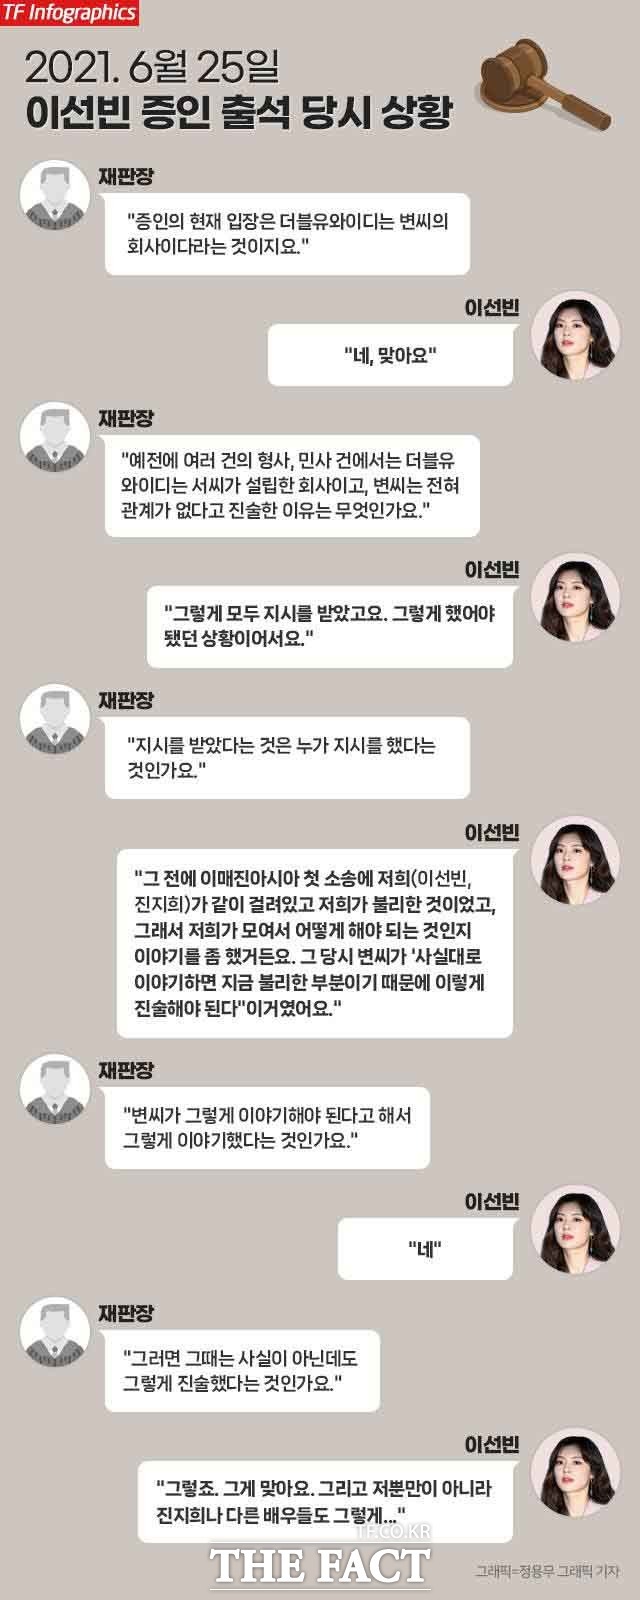 Jin Ji-hee, who was mentioned in Lee Sun-bins court testimony, said, Preliminary consultation is not true.We didnt actually get together with Lee Sun-bin to discuss what to do.Actor Jin Ji-hee (23), one of the fellow entertainers who was pointed out to have consulted false testimony at the time, was found to have confessed to the court in 2021 that actor Lee Sun-bin (28) made false statements against Prosecution, It is not true, and another controversy is expected.An official of CJS Entertainment, a subsidiary of actor Jin Ji-hee, said on the 12th, Is there any fact that Lee Sun-bin discussed false statements prior to the Prosecution investigation? Jin Ji-hee had not consulted Lee Sun-bin prior to the Prosecution investigation, I confirmed that my mother had received it on behalf of Jin Ji-heeI do not know why Lee Sun-bin made such a claim. When asked whether Jin Ji-hee, the mother of Lee Sun-bin, had made a false statement in the Prosecutions investigation at the time, he said, Absolutely not. I made a statement as it is.It is noteworthy that Lee Sun-bin was a court witness in the case of former Well-Made Yedang Chairman Byeon, who sued Seo, the former CEO of W.Wide Entertainment (hereinafter referred to as W.Widey) in 2021 on charges of blackmail, and was directly placed in front of the fact that he mentioned while reversing the investigation statement of the Prosecution reference in 2016 by 180 degrees.Lee Sun-bin said in court that W. Widdie had nothing to do with Mr. Byeon, but before that, we were in the first lawsuit against Lee Mae-jin, and we talked about what we should do together. At that time, Mr. Byeon said, If you tell the truth, you have to confess that it was a false statement. Its him.Lee Sun-bins 180-degree testimony on the same issue was known to the world on January 4 as an exclusive report of <> ([single] I think it would be disadvantageous ... Lee Sun-bin, It led to a petition to the National Assembly for the introduction of judicial interference.As the scandal spread, Jin Ji-hees mother Koo broke her silence about two months after the exclusive report of <> and denied Lee Sun-bins testimony in court.In the meantime, Mr. Koo, who has been in contact with several times in the past, has been accused of being the largest shareholder of this company in the past. In connection with the fact that Jin Ji-hee and other actors are not true, It is different from the testimony of Lee Sun-bin. It is necessary to correct the facts and other contents, and it is necessary to clarify the position, explained the agency.According to his agency and another official, Koo attended the Prosecution Office in central Seoul in December 2016 on behalf of his then-minor daughter, Jin Ji-hee, and was questioned as a witness in connection with the case in which Imagine Asia sued Byeon.Mr. Gu said in a Prosecution survey at the time, Mr. Seo is right to run the company and Mr. Sung has nothing to do with it.There is Seo Moo in Jin Ji-hees contract with W. Waidi.In the Prosecution survey in 2016, Mr. Koo said, I got a contract with Mr. Seo, he said. In the process of signing W. Waidy, Mr. Sung is not involved.Lee Sun-bin, who was in court in 2021, said, W. Waidy is Mr. Wongs company. Mr. Wong and Mr. Seo are on the same side.And because our actors were on the same side, we decided to kiss them, and even before entering the door, Mr. Seo said, You can organize it like this.Jin Ji-hees agency said, I do not know why Lee Sun-bin mentioned Jin Ji-hees name, but it is not true at all.At the time, I just talked about the facts in Prosecution, but I did not make a false statement because of the disadvantage of Yi Gi because of the lawsuit against Imagine Asia. However, Lee Sun-bin is in a position to be unfair.Lee Sun-bins agency, Initial Entertainment, said in a telephone conversation with Lee on October 10, It is frustrating and frustrating that Lee Sun-bin seems to be in trouble because of the quarrel between Mr.Lee Sun-bin is also having a hard time in many ways. I am worried that this issue will be seen as a truth workshop. Lee Sun-bin declined to comment on the background of referring to Jin Ji-hee in court testimony.However, the agency said, Lee Sun-bins testimony, We talked about what we should do together, and at that time, Mr. Byun said, If you tell the truth, I do not think it is related to Jin Ji-hee In this testimony, Jin Ji-hees name was not mentioned directly.However, the judge asked, Then, did you make such a statement even though it was not true at the time?And not only me, but also Jin Ji-hee and other actors ... The excuse that I did not mention Jin Ji-hee directly is losing persuasiveness.The agency said, Lee Sun-bin was saying that he should talk about it at the time, and he did not mean to intentionally or lie.Lee Sun-bin, who is currently meeting with viewers with tvN Drinker City Girls 2, is a member of OCNs original series 38 Gyeongdae , MBC entertainment I live alone , Mnet I have accumulated awareness in various broadcasting fields such as Running Man.In addition to Lee Sun-bin, the agencys initial entertainment company also includes entertainers such as Sung-yuri Lee Jung-hyun, Kim Dong-ho, Ryu Seung-moo and Lim Soo-hyung.[Entertainment  ⁇